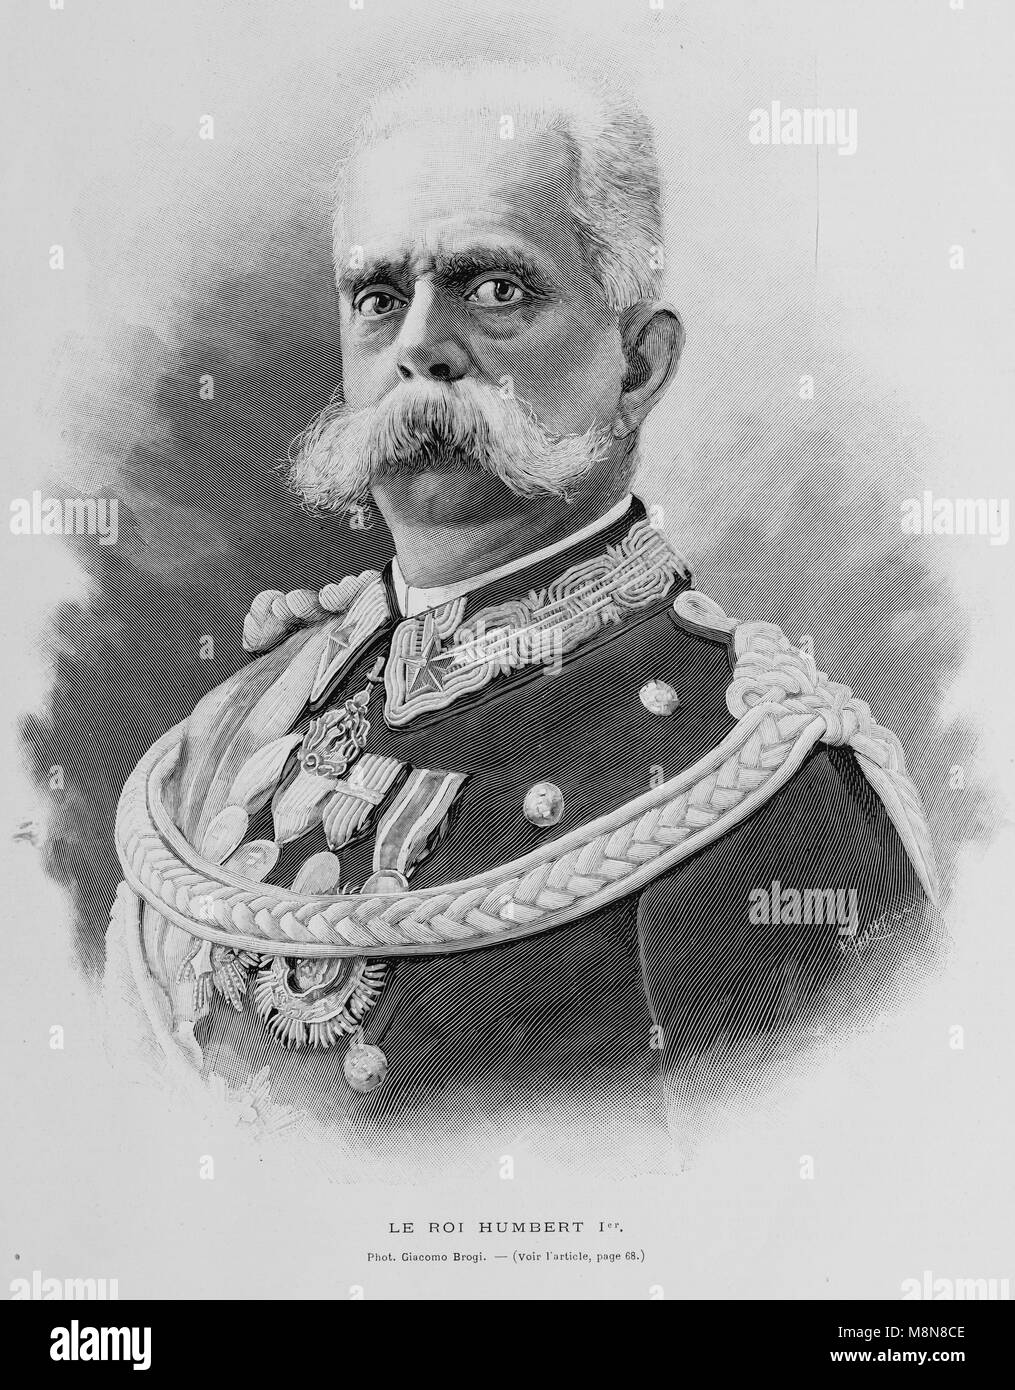 King Humberto I of Italy before his assassination, Picture from the French weekly newspaper l'Illustration, 4th August 1900 Stock Photo